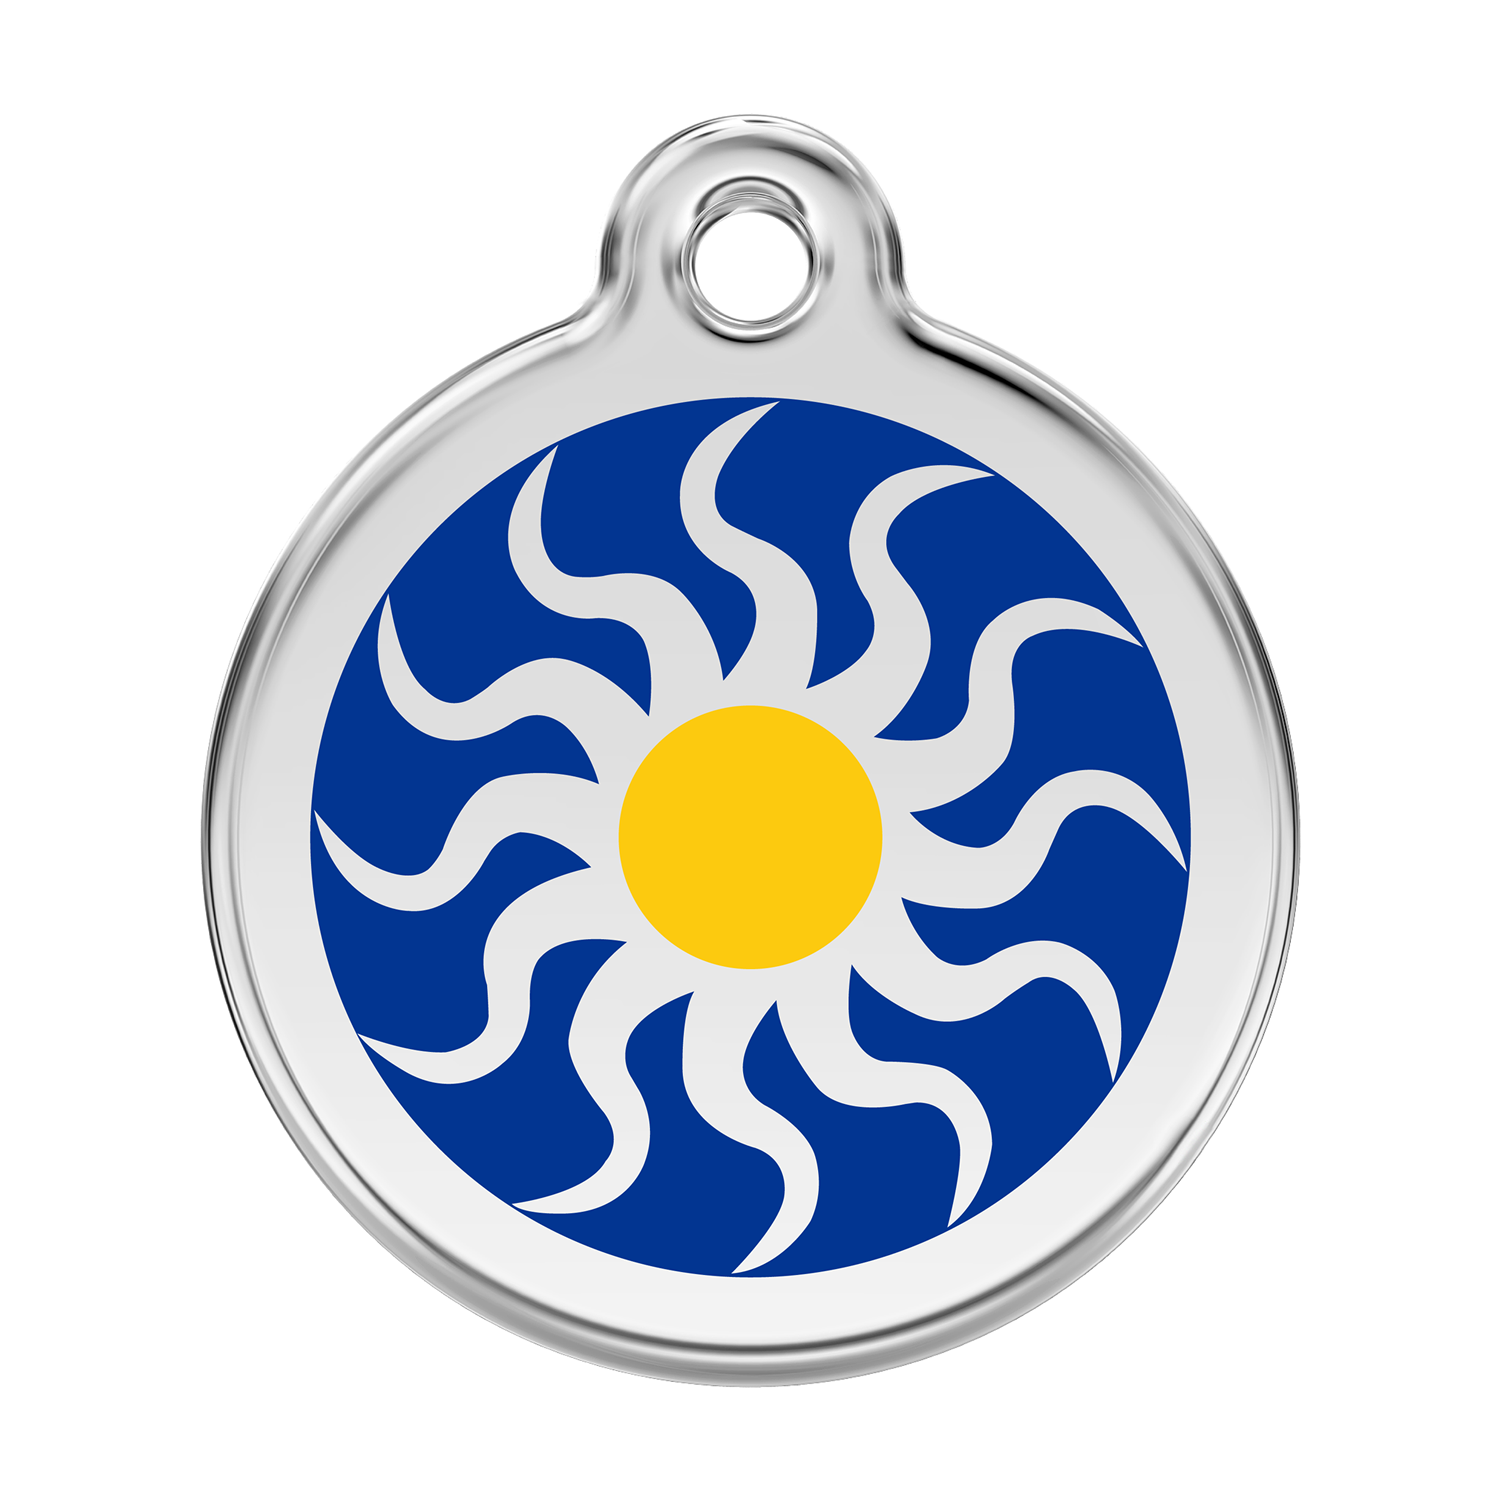 Red Dingo Stainless Steel & Enamel Tribal Sun Dog ID Tag